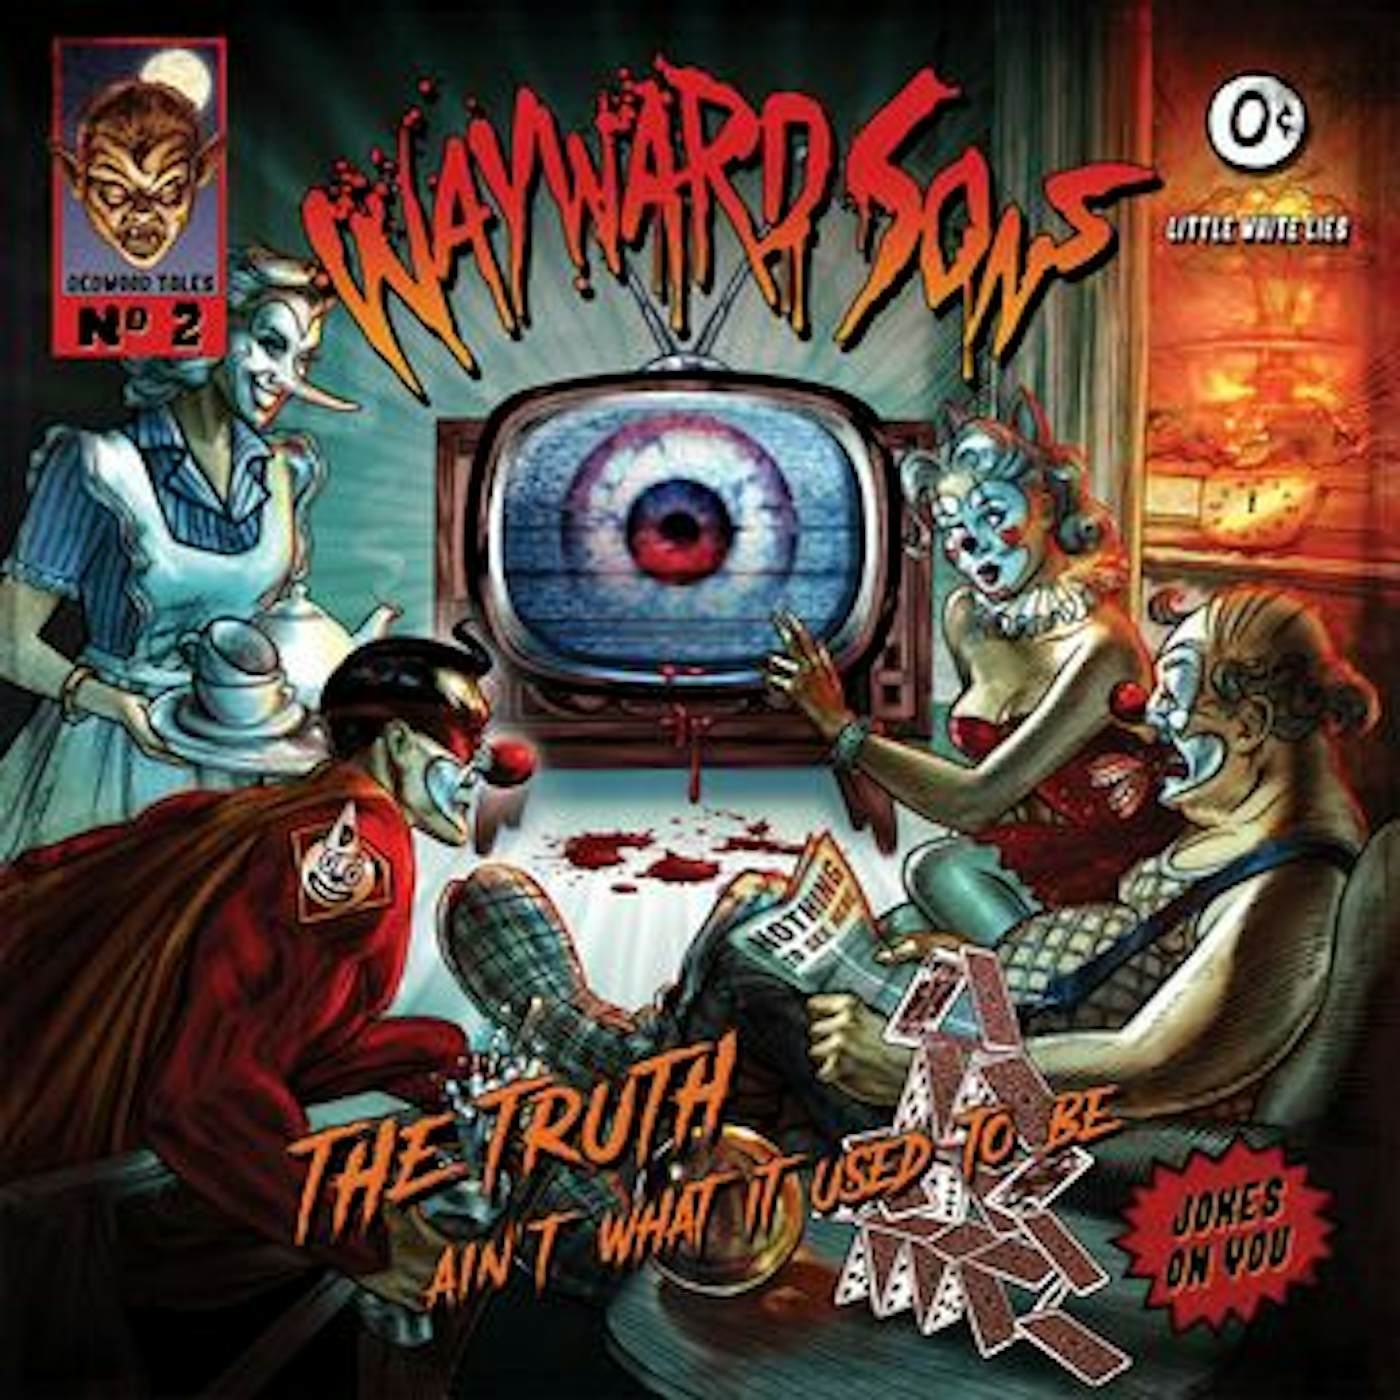 Wayward Sons Truth aint what it used to be cd CD